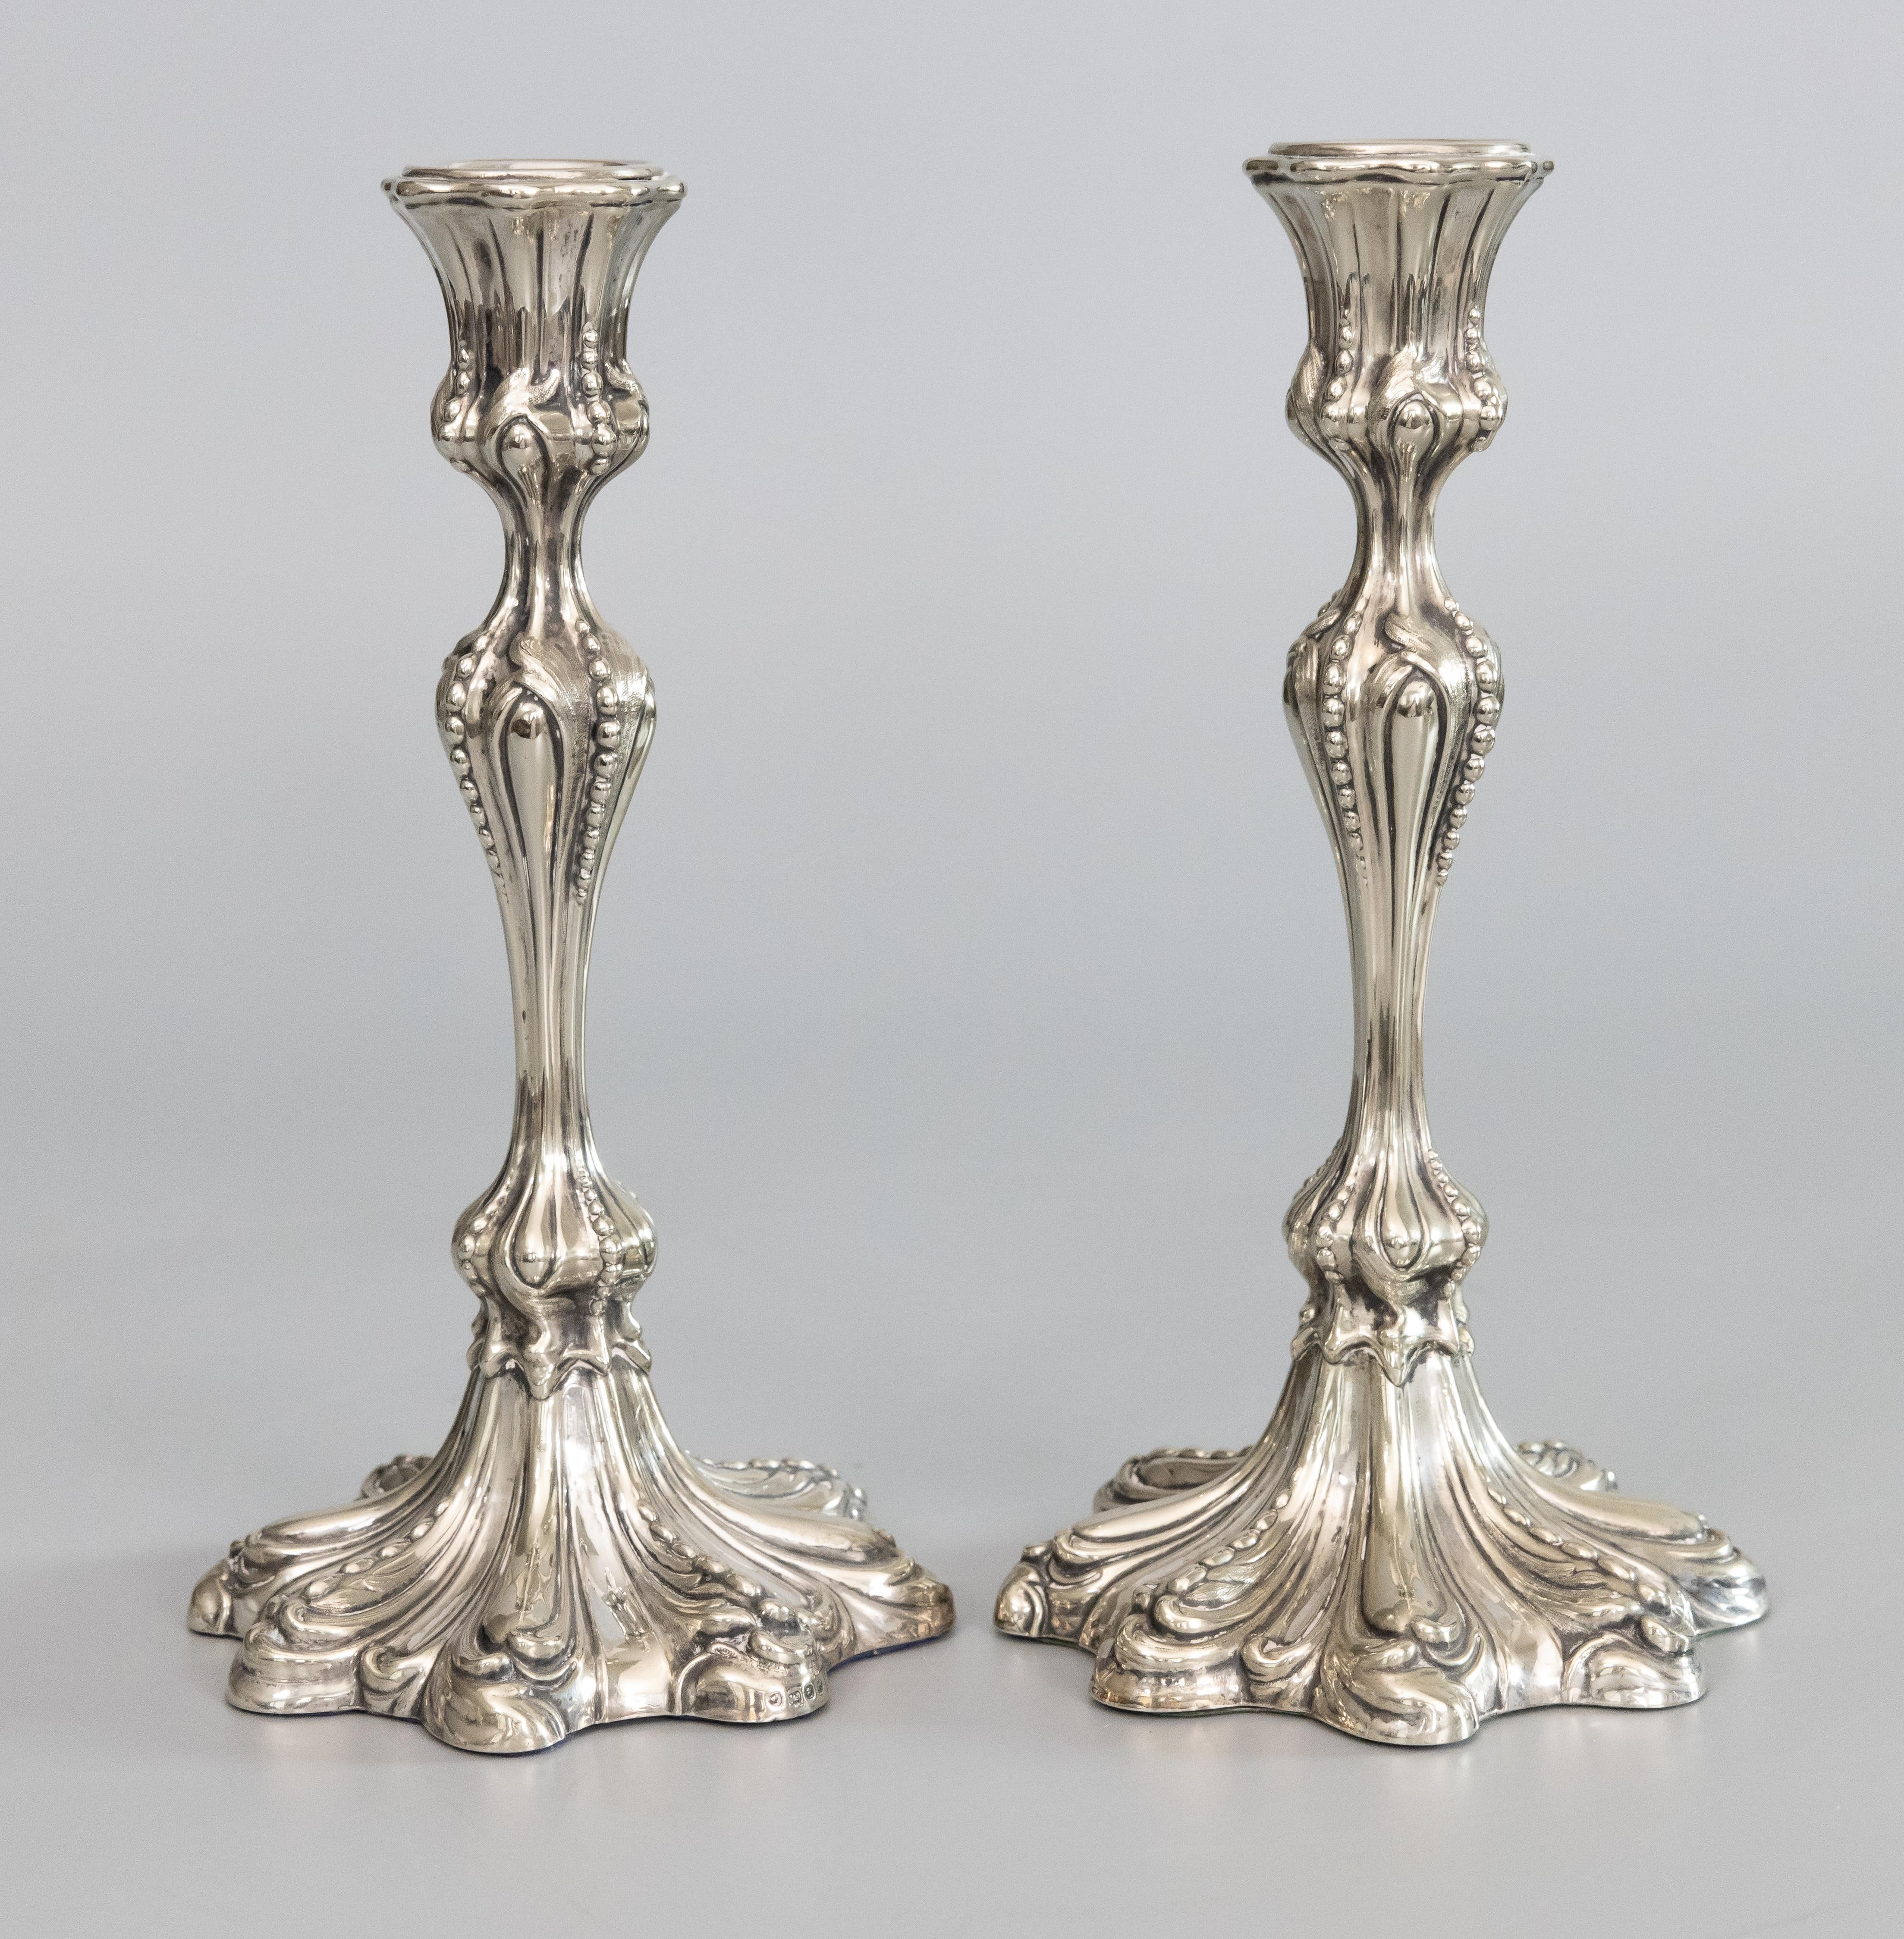 A superb pair of antique 19th-Century English silverplate candlesticks by JFF & Co, circa 1860-1870. Hallmarks on base. These gorgeous candle holders are a nice tall size and heavy with a lovely shape and an ornate Rococo style design.

